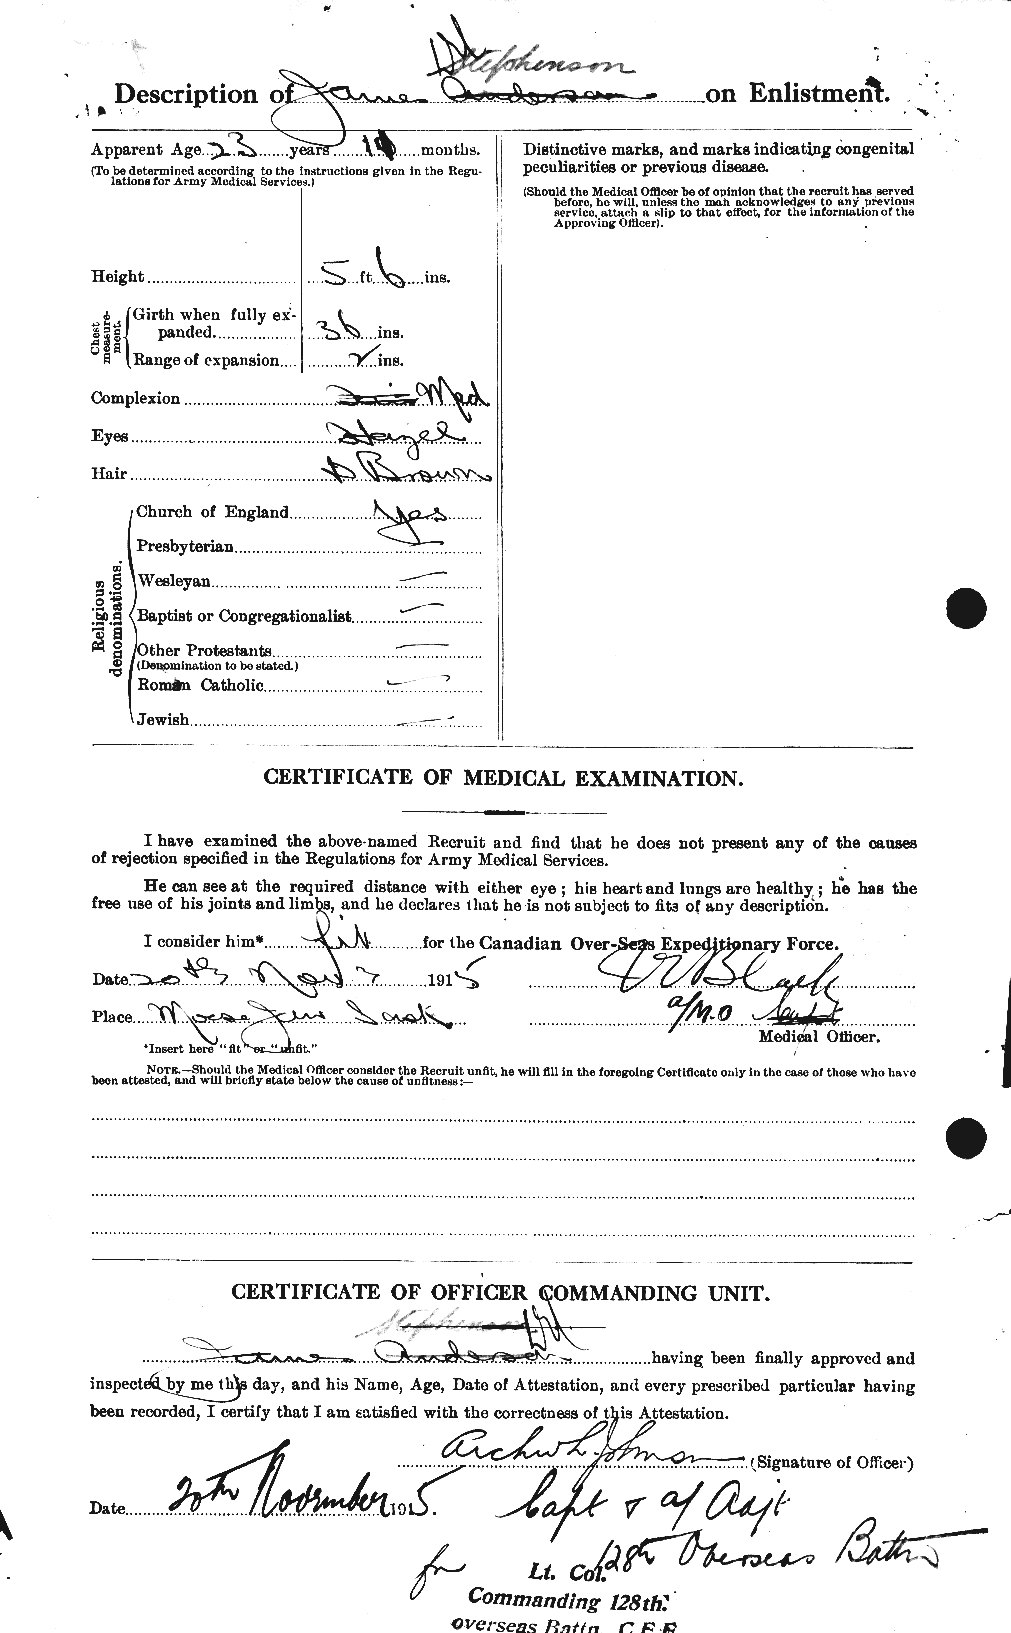 Personnel Records of the First World War - CEF 117194b